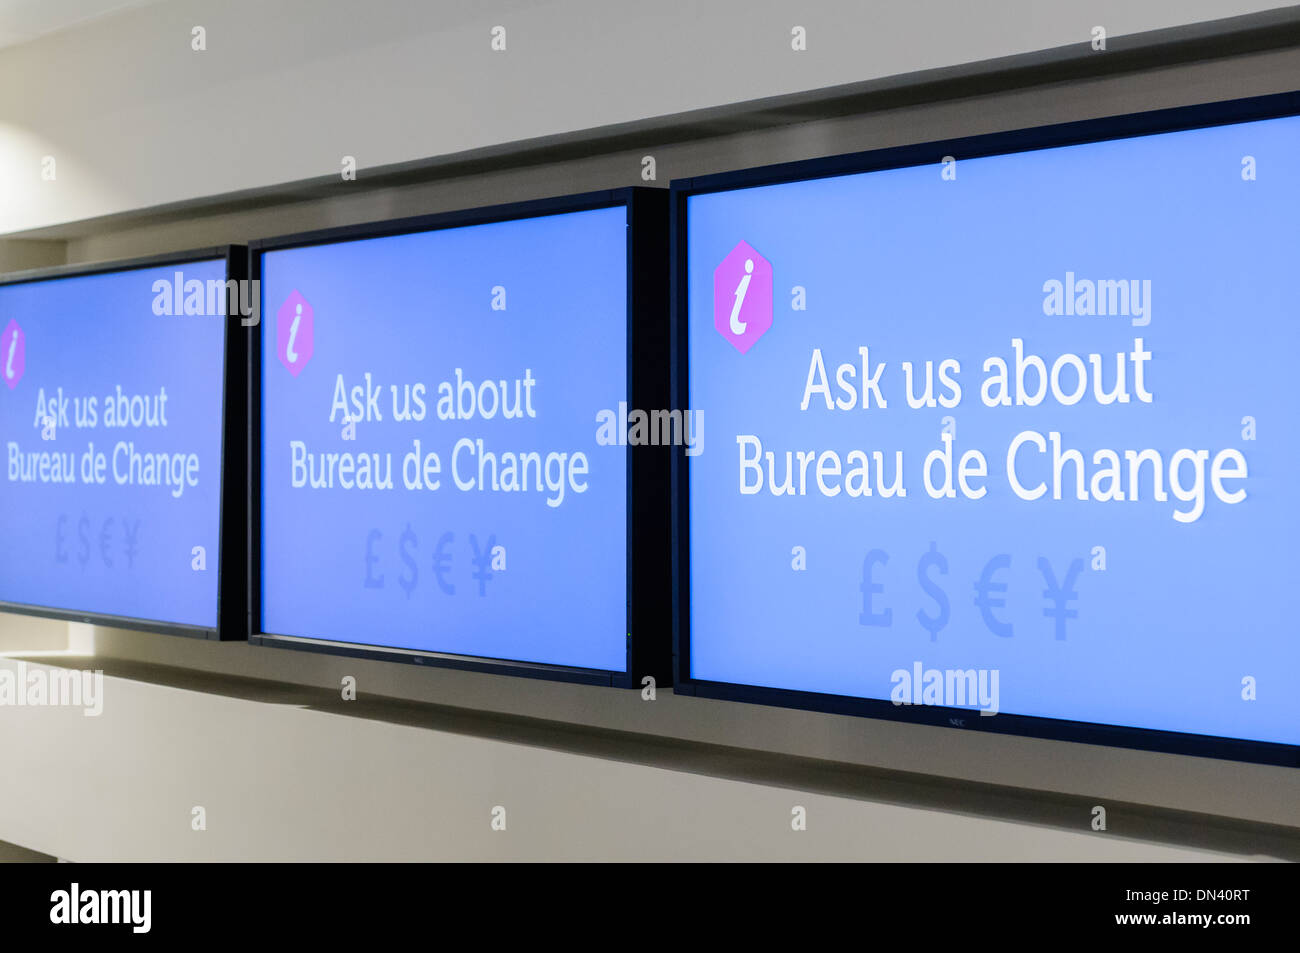 Screens in a tourist information office asking visitors to ask about Bureau de Change facilities Stock Photo